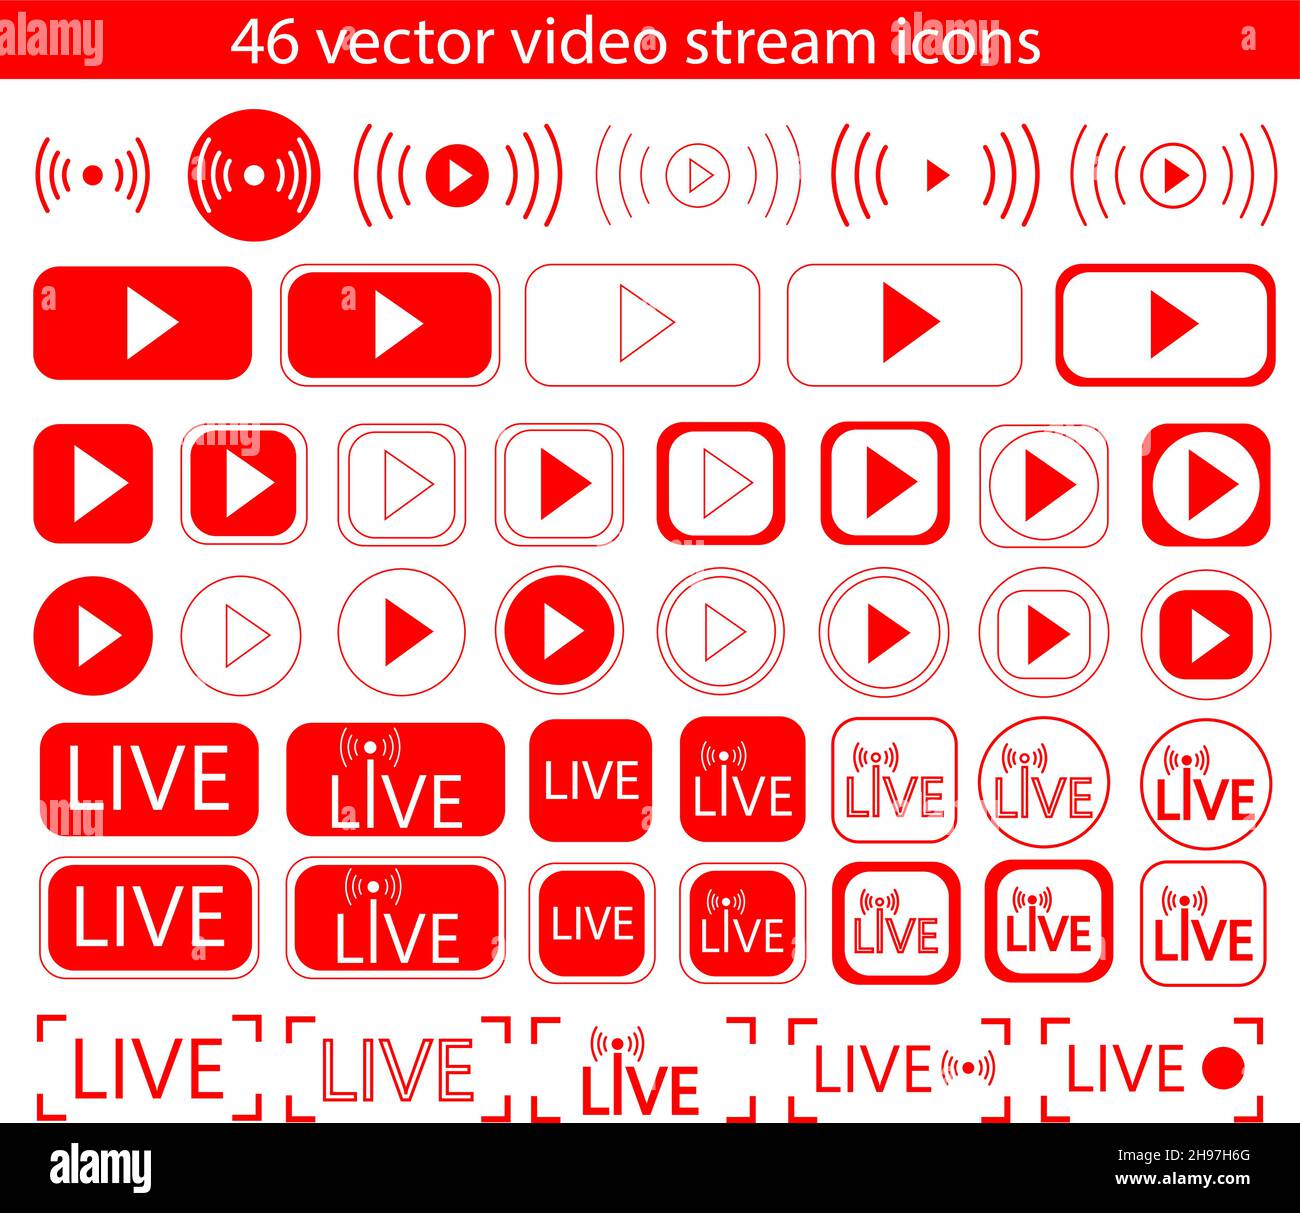 Live video streaming icons collection. Red vector symbols of live streaming illustration. Broadcasting, online video stream vector elements for TV blo Stock Vector